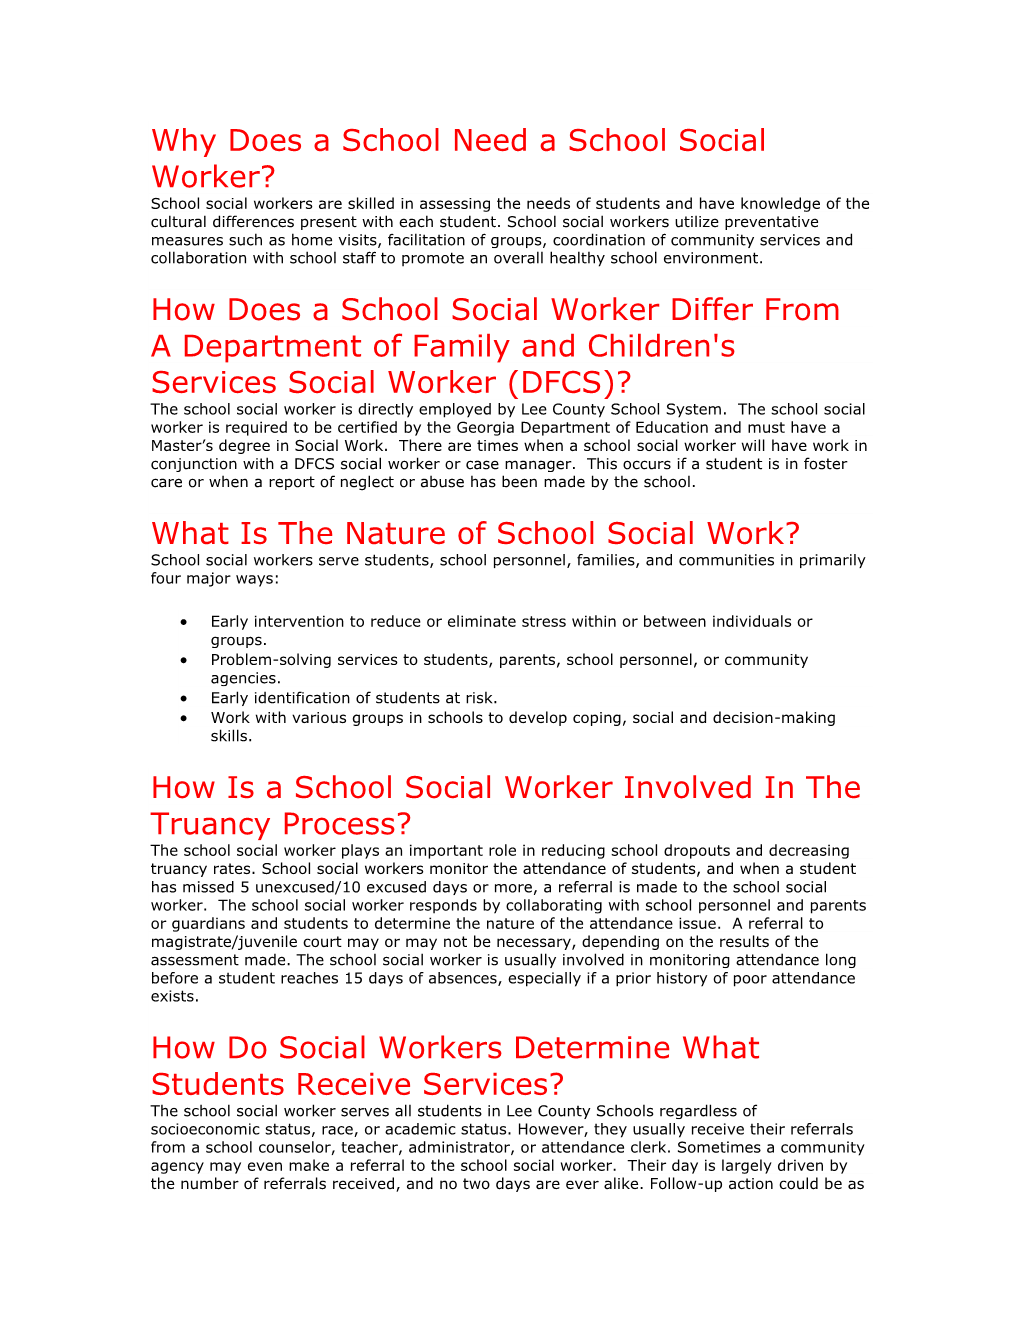 Why Does a School Need a School Social Worker